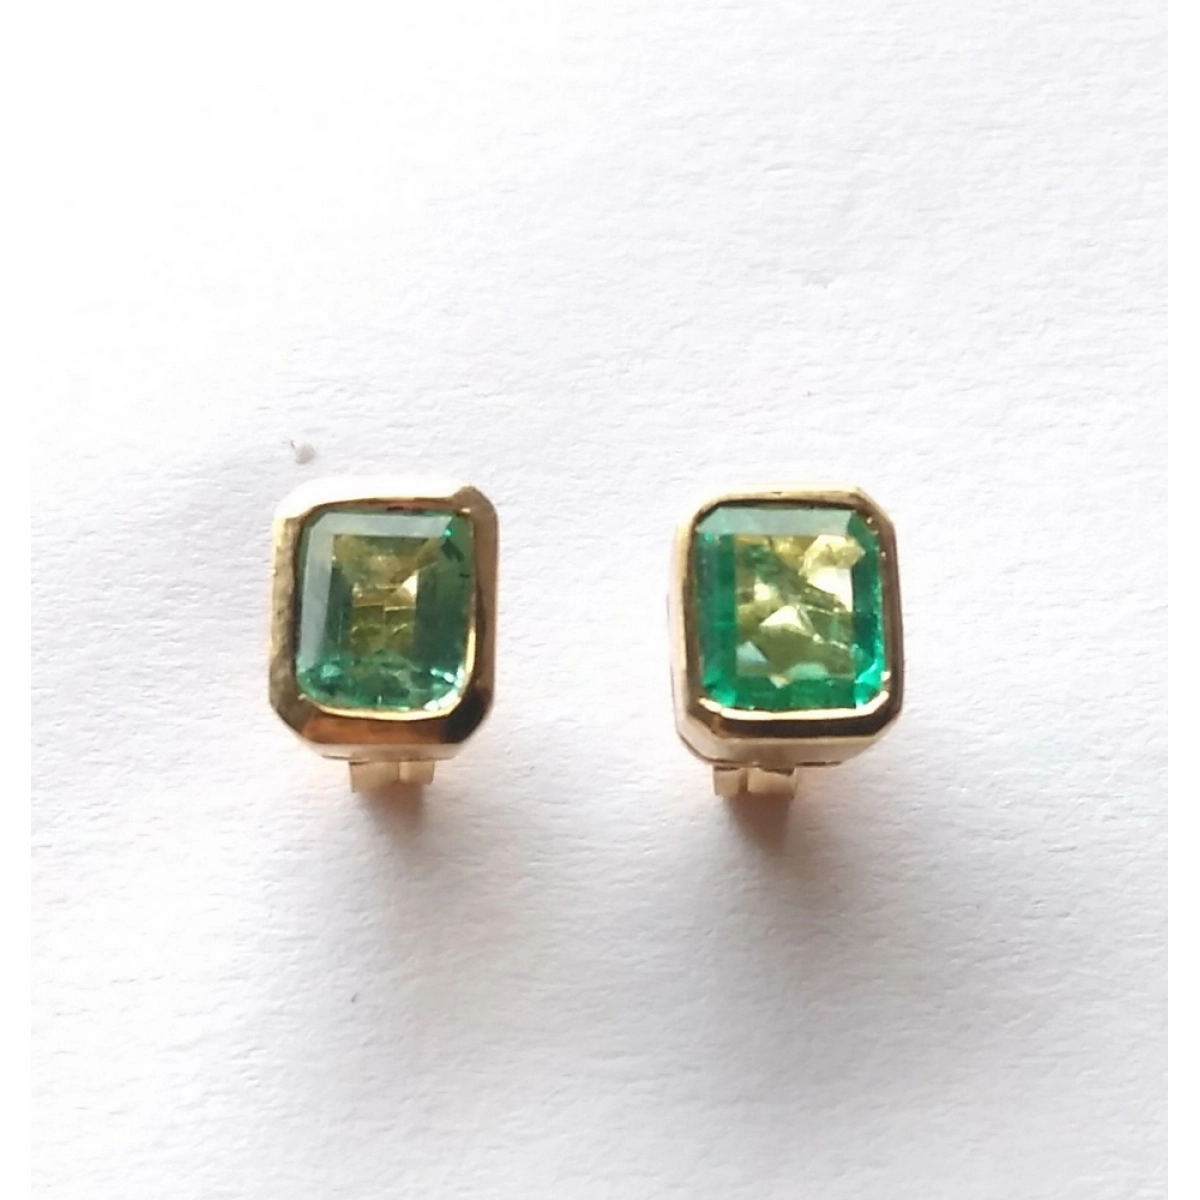 EARRINGS OF EMERALDS AND 18K GOLD